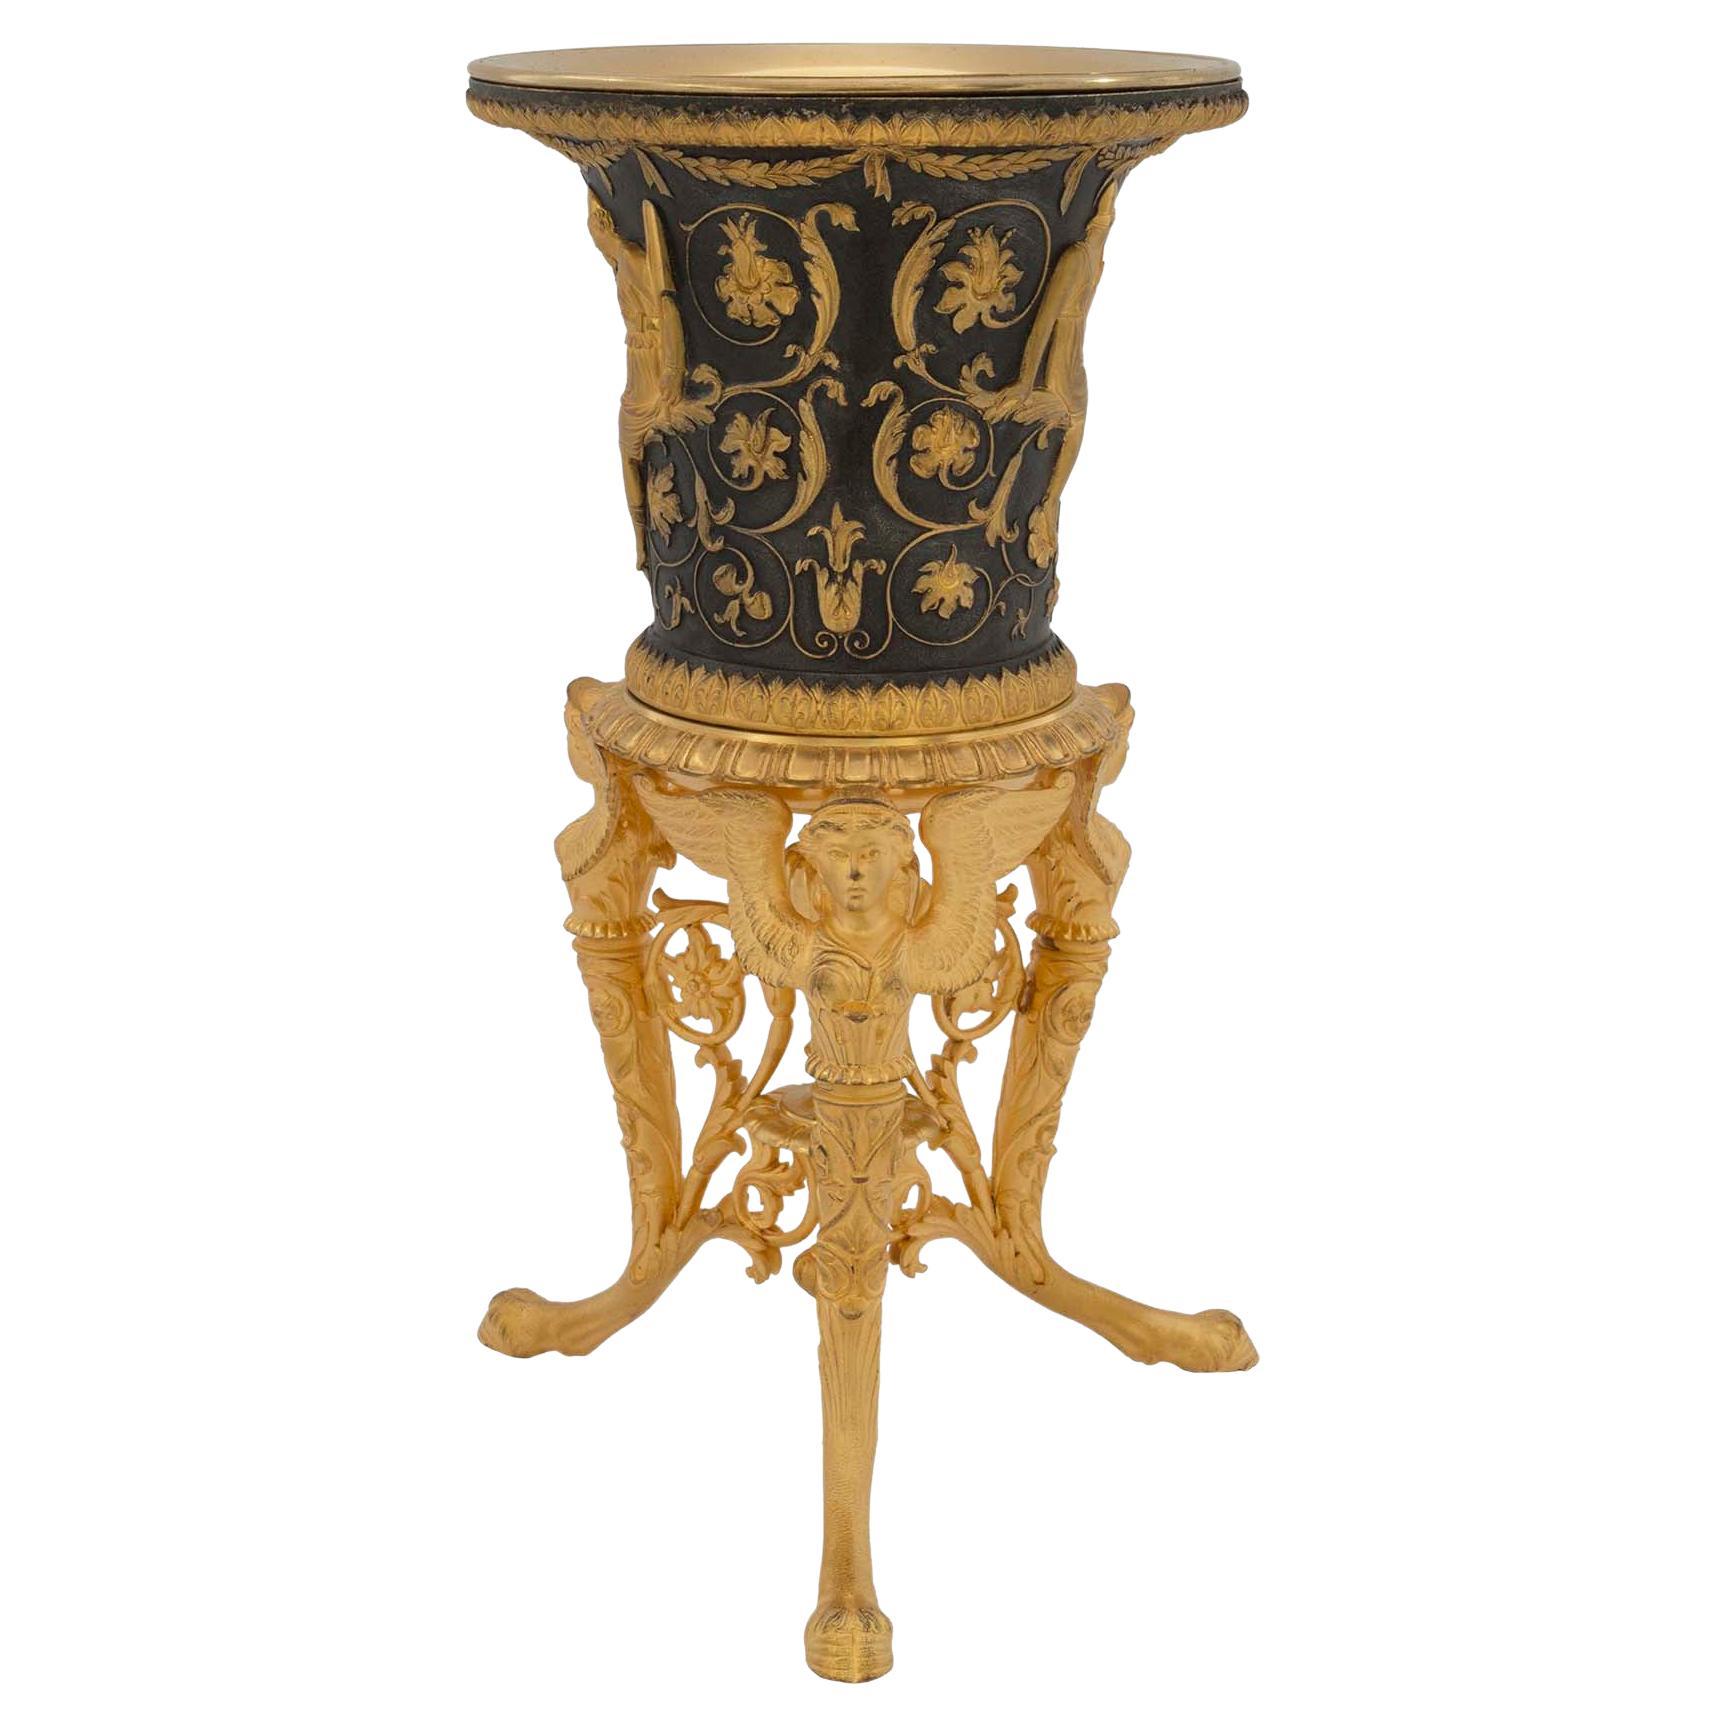 French 19th Century Neoclassical Style Bronze and Ormolu Urn